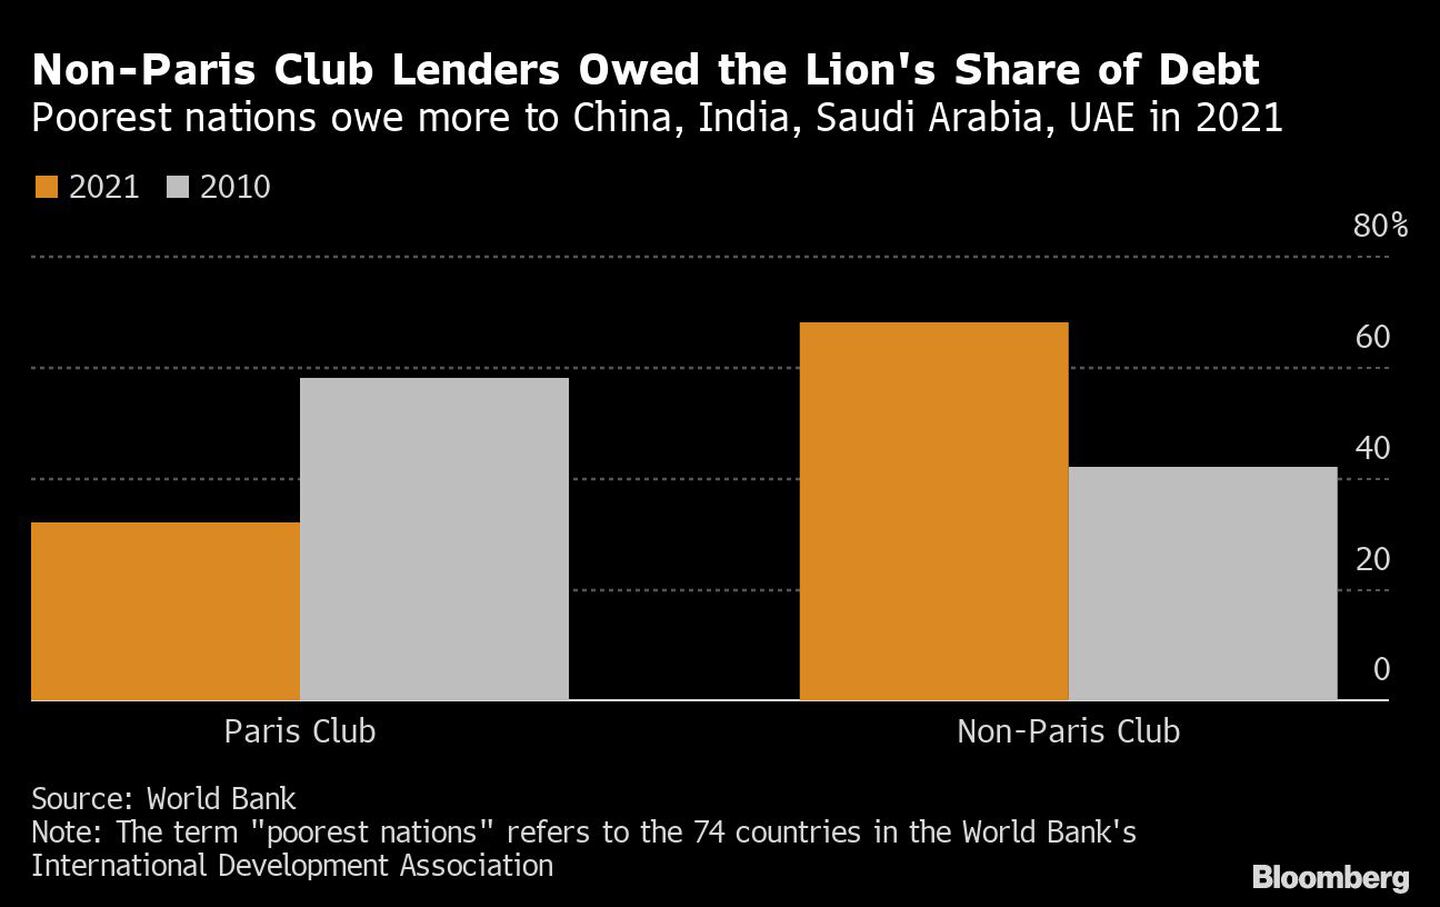 Non-Paris Club Lenders Owed the Lion's Share of Debt | Poorest nations owe more to China, India, Saudi Arabia, UAE in 2021dfd